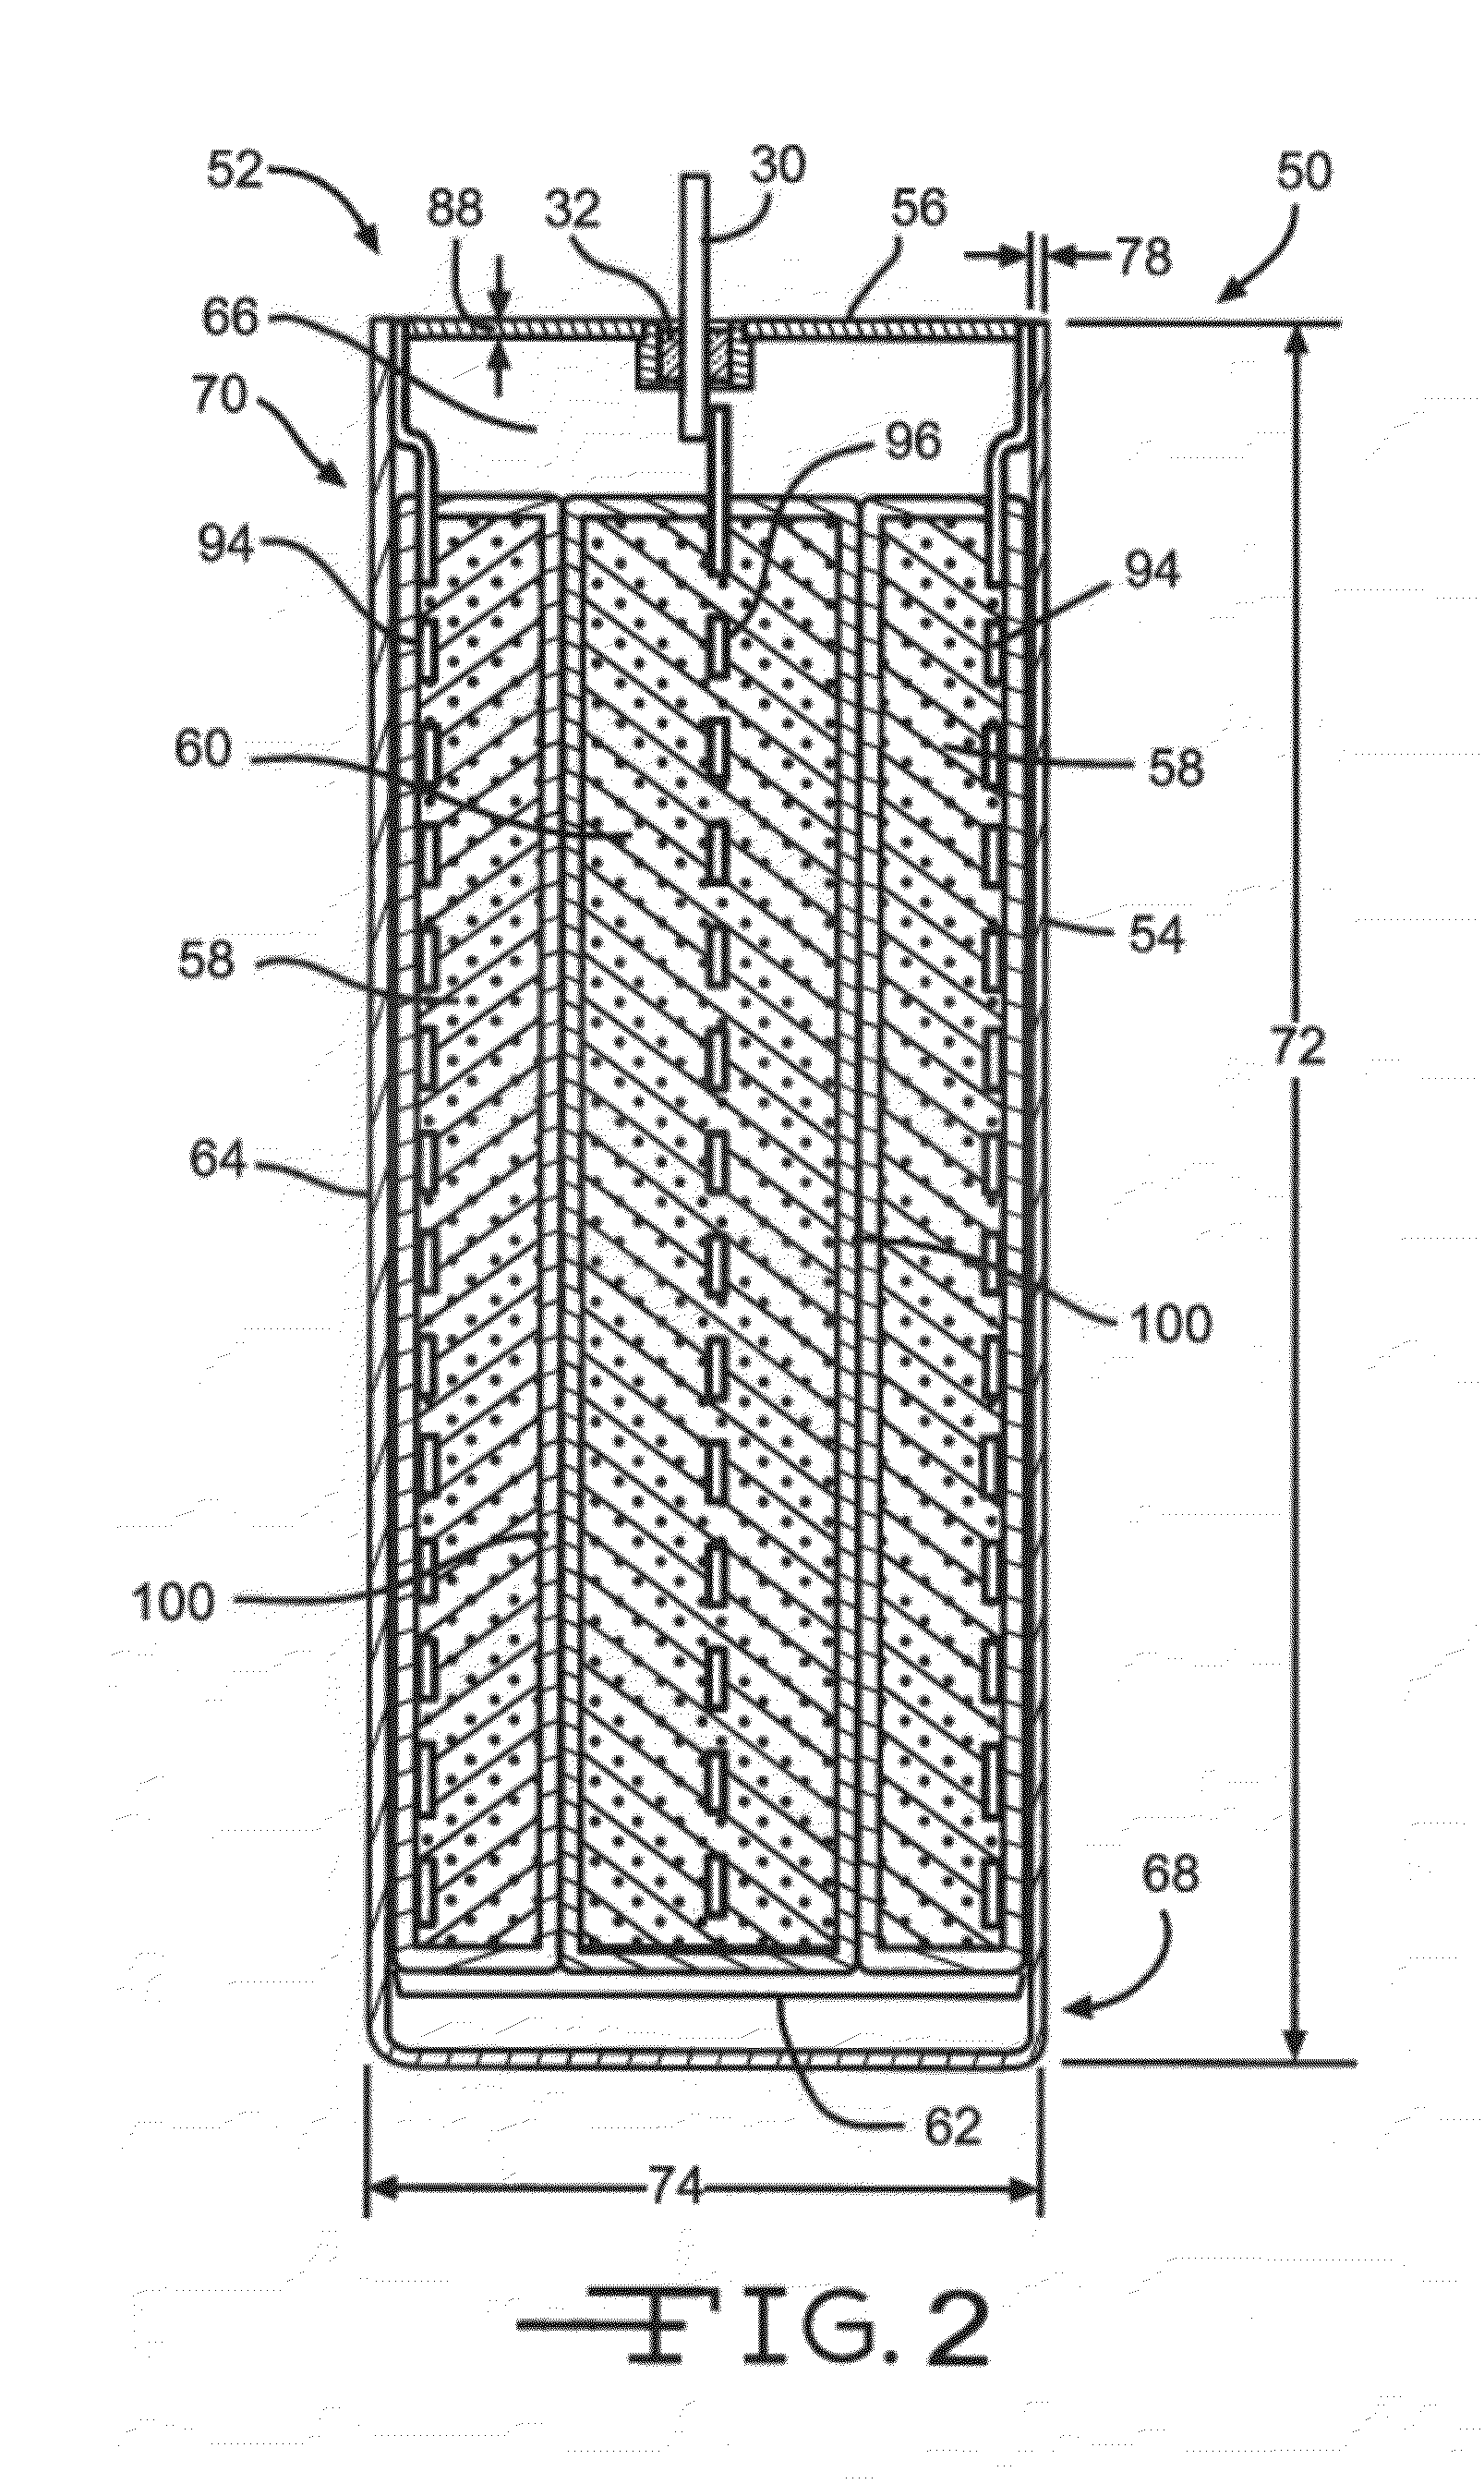 Dissimilar Material Battery Enclosure for Improved Weld Structure